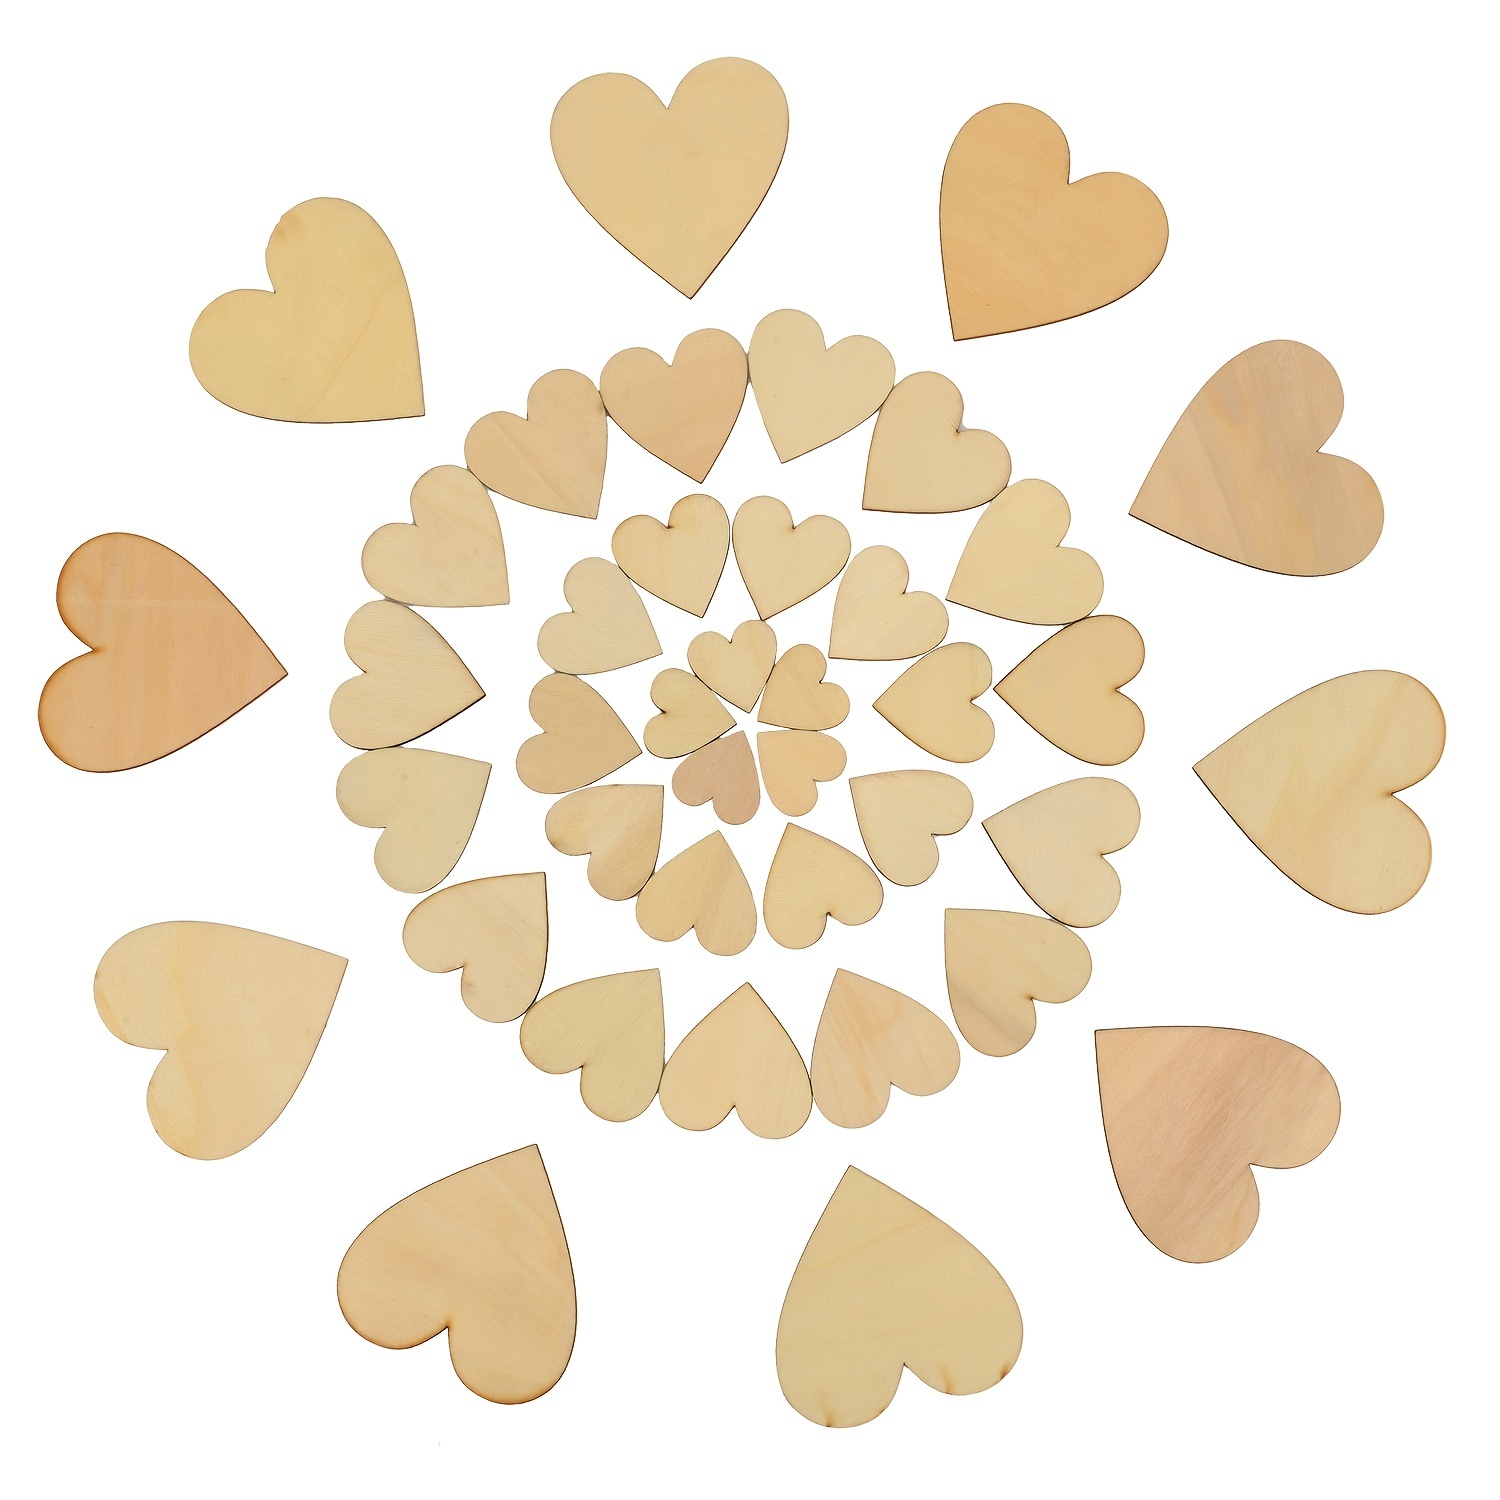 HADDIY 1 Inch Small Wooden Hearts for Crafts,200 Pcs Unfinished Wood Heart  Cutouts Ornaments for Wedding Guest Book,Valentine'Day Craft and